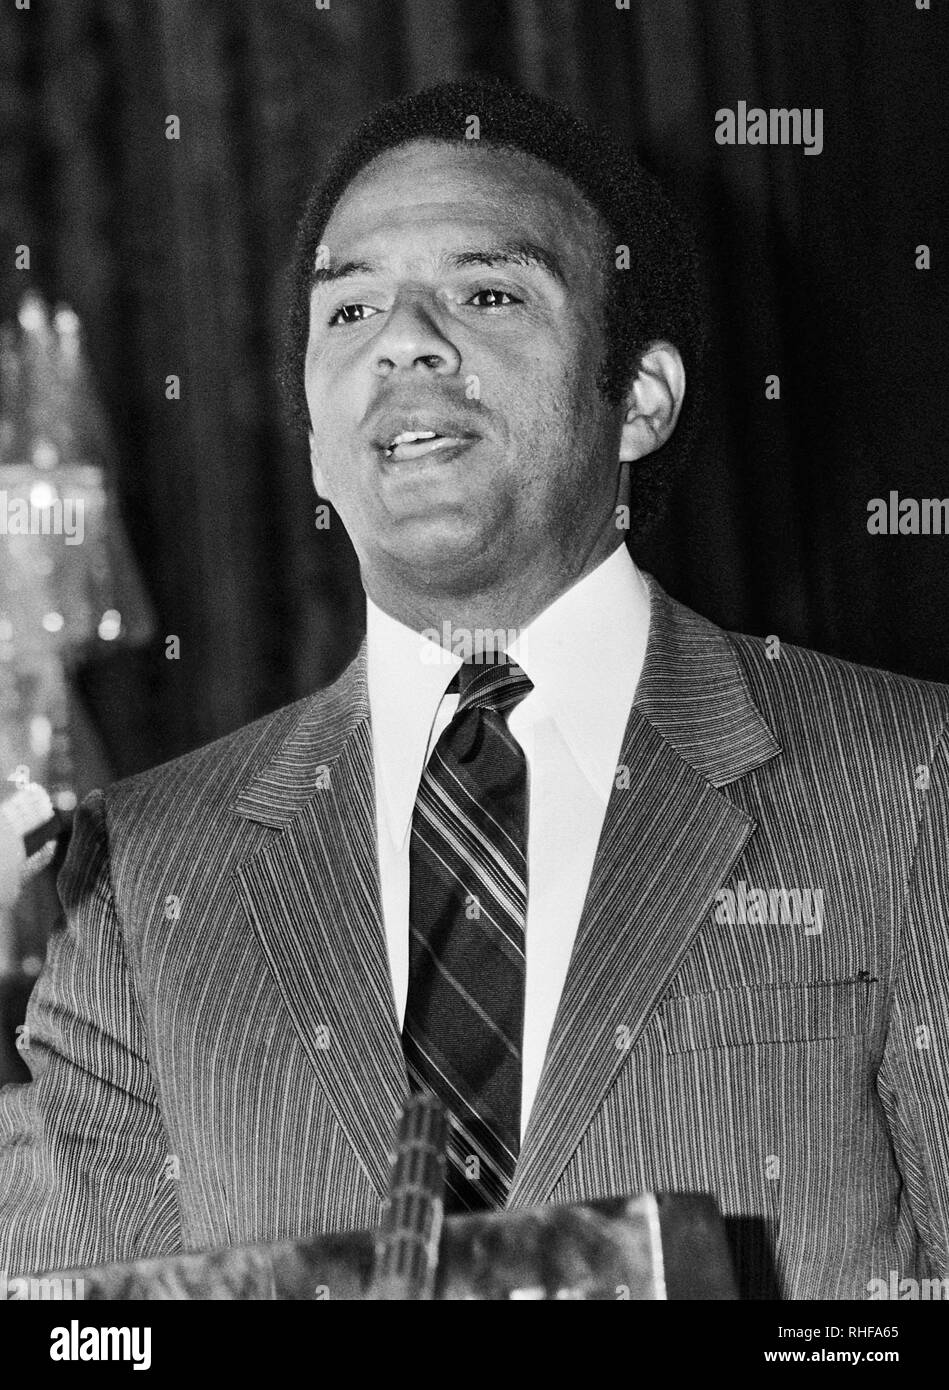 Andrew Young in Amsterdam, Holland am 13. Mai 1980. Stockfoto